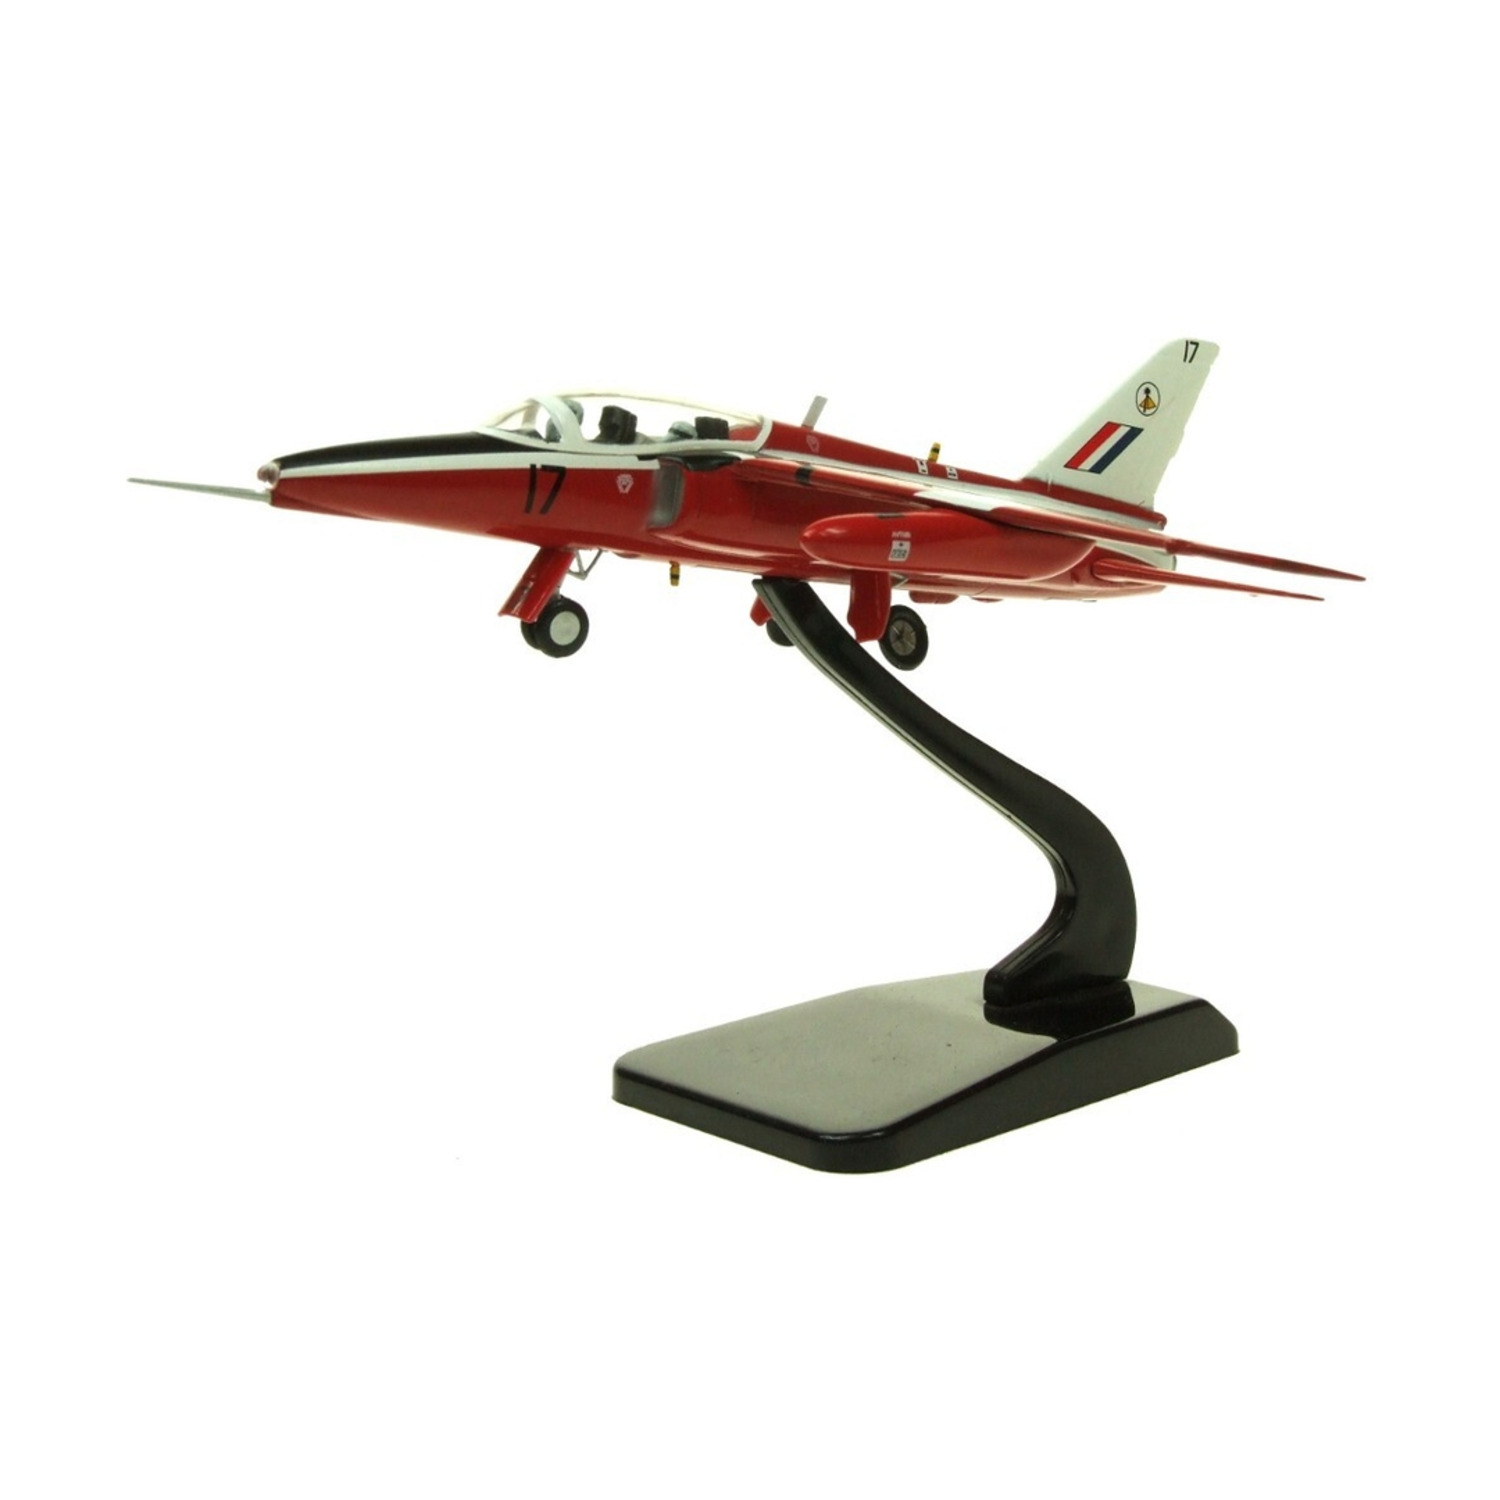 Folland Gnat 4 FTS RAF Valley XR980 (Limited Edition) New - image 2 of 3